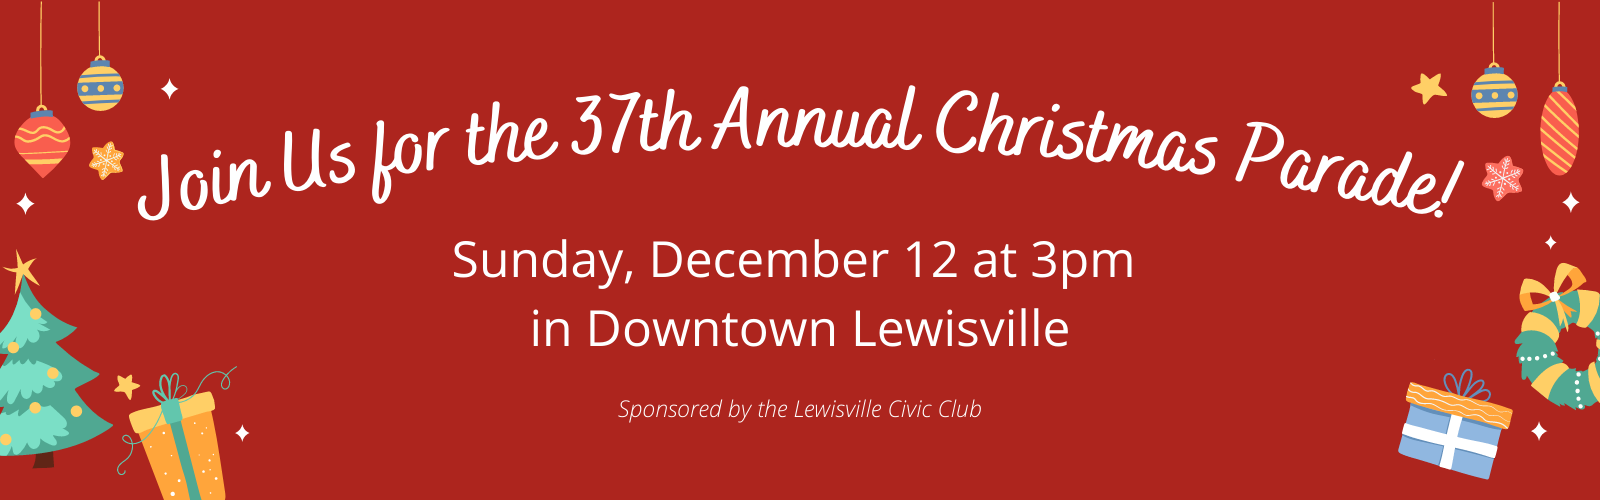 Lewisville Christmas Parade, Sunday Dec. 13, 2021 at 3pm